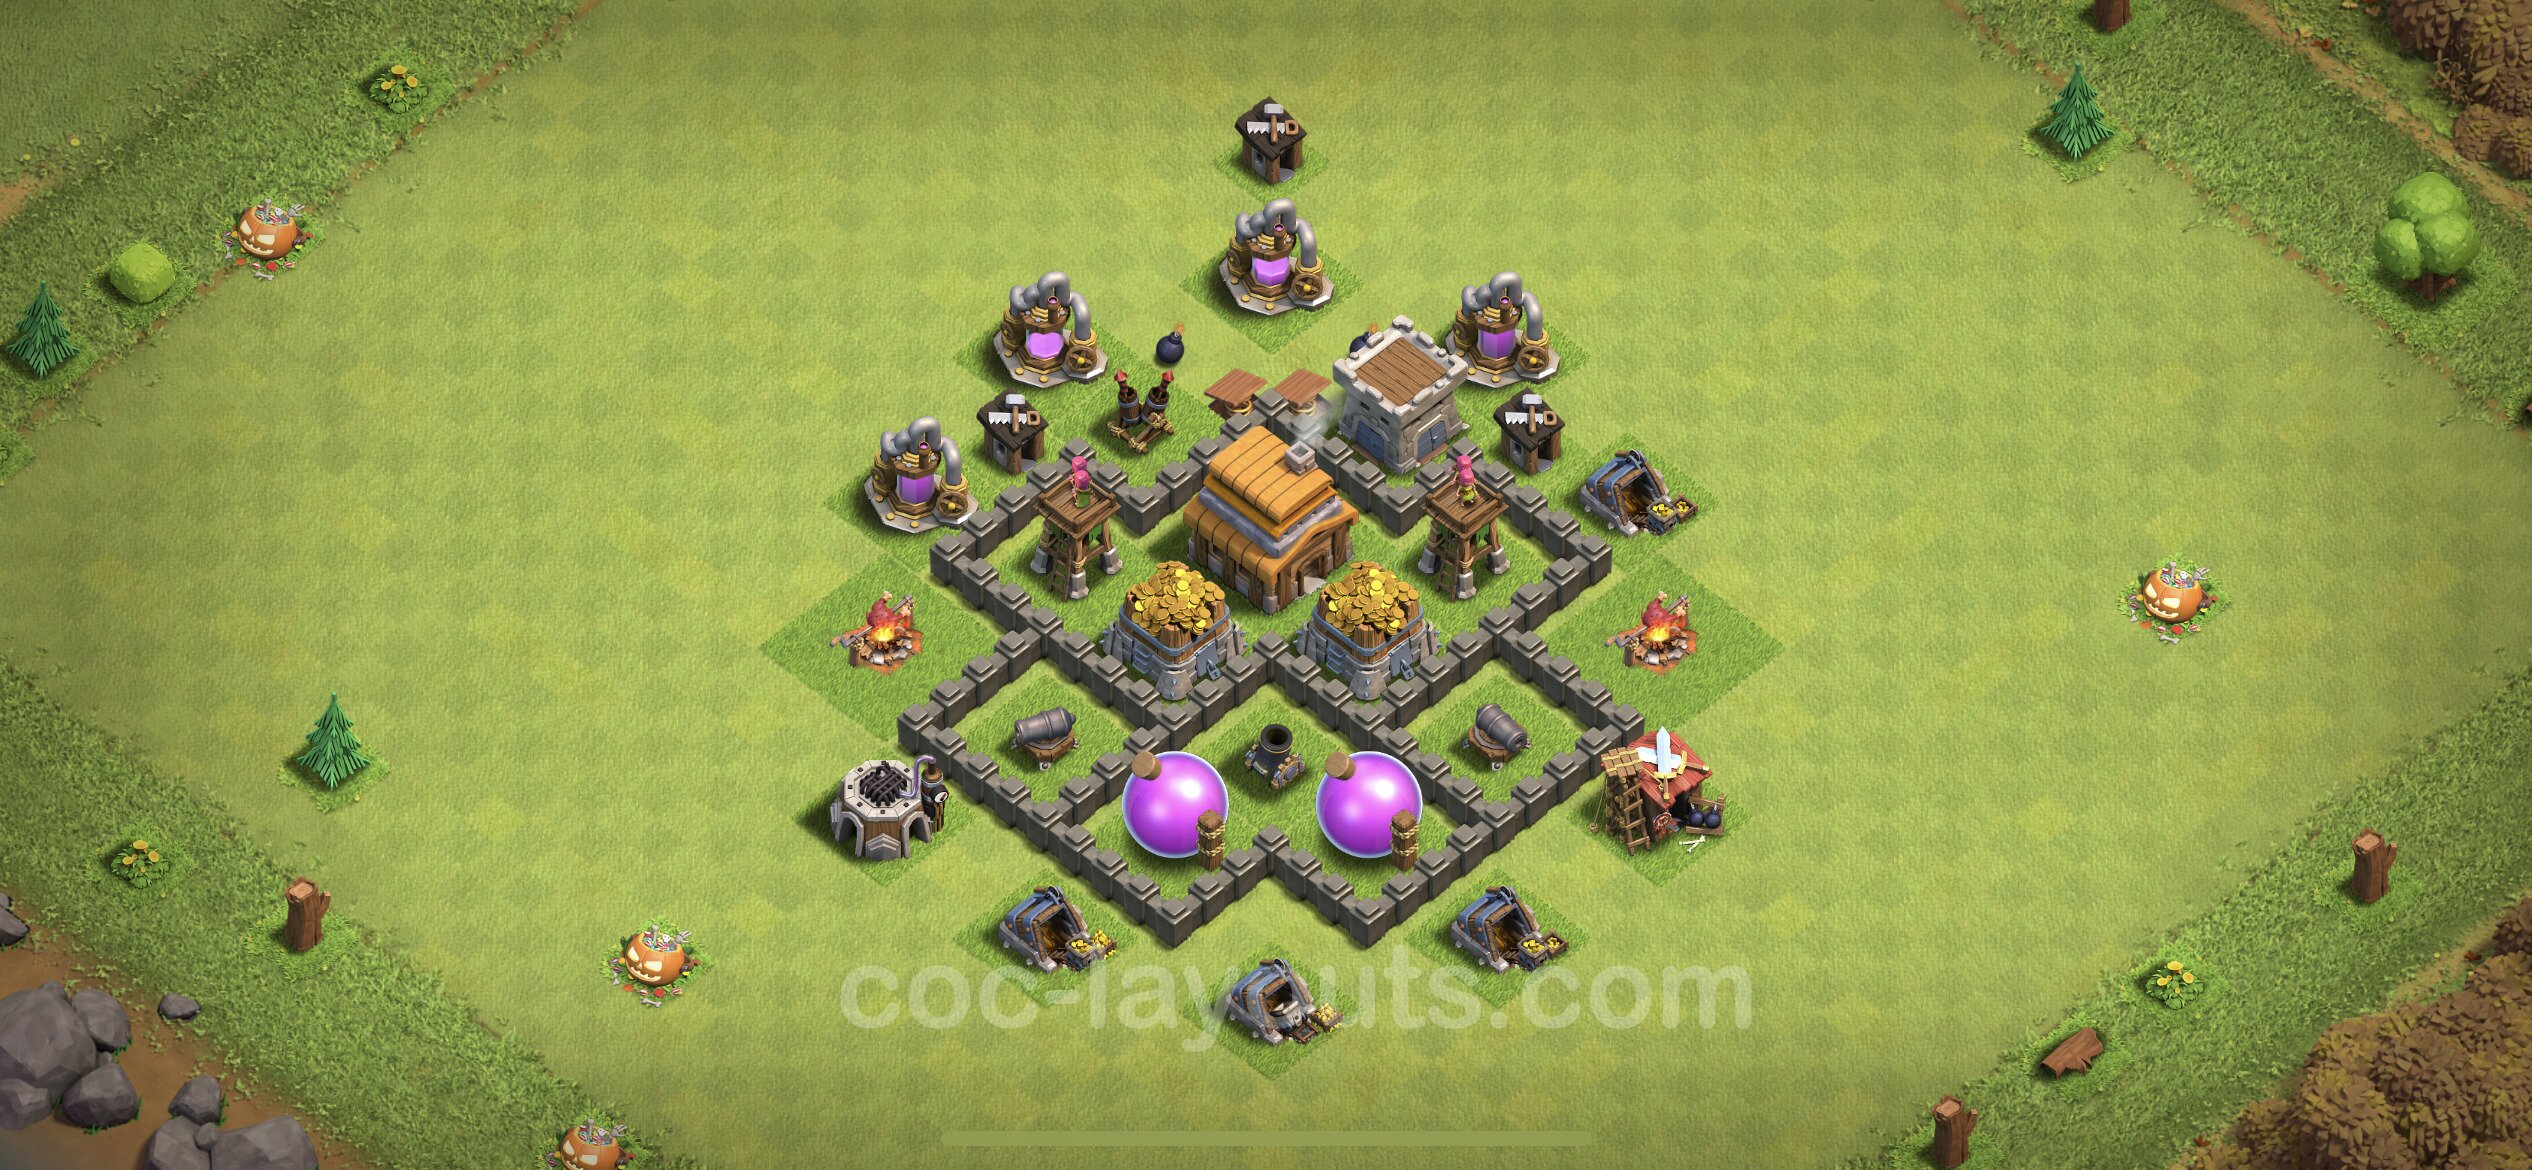 Defense (Trophy) Base TH4 with Link, Hybrid - plan / layout / design - Clas...